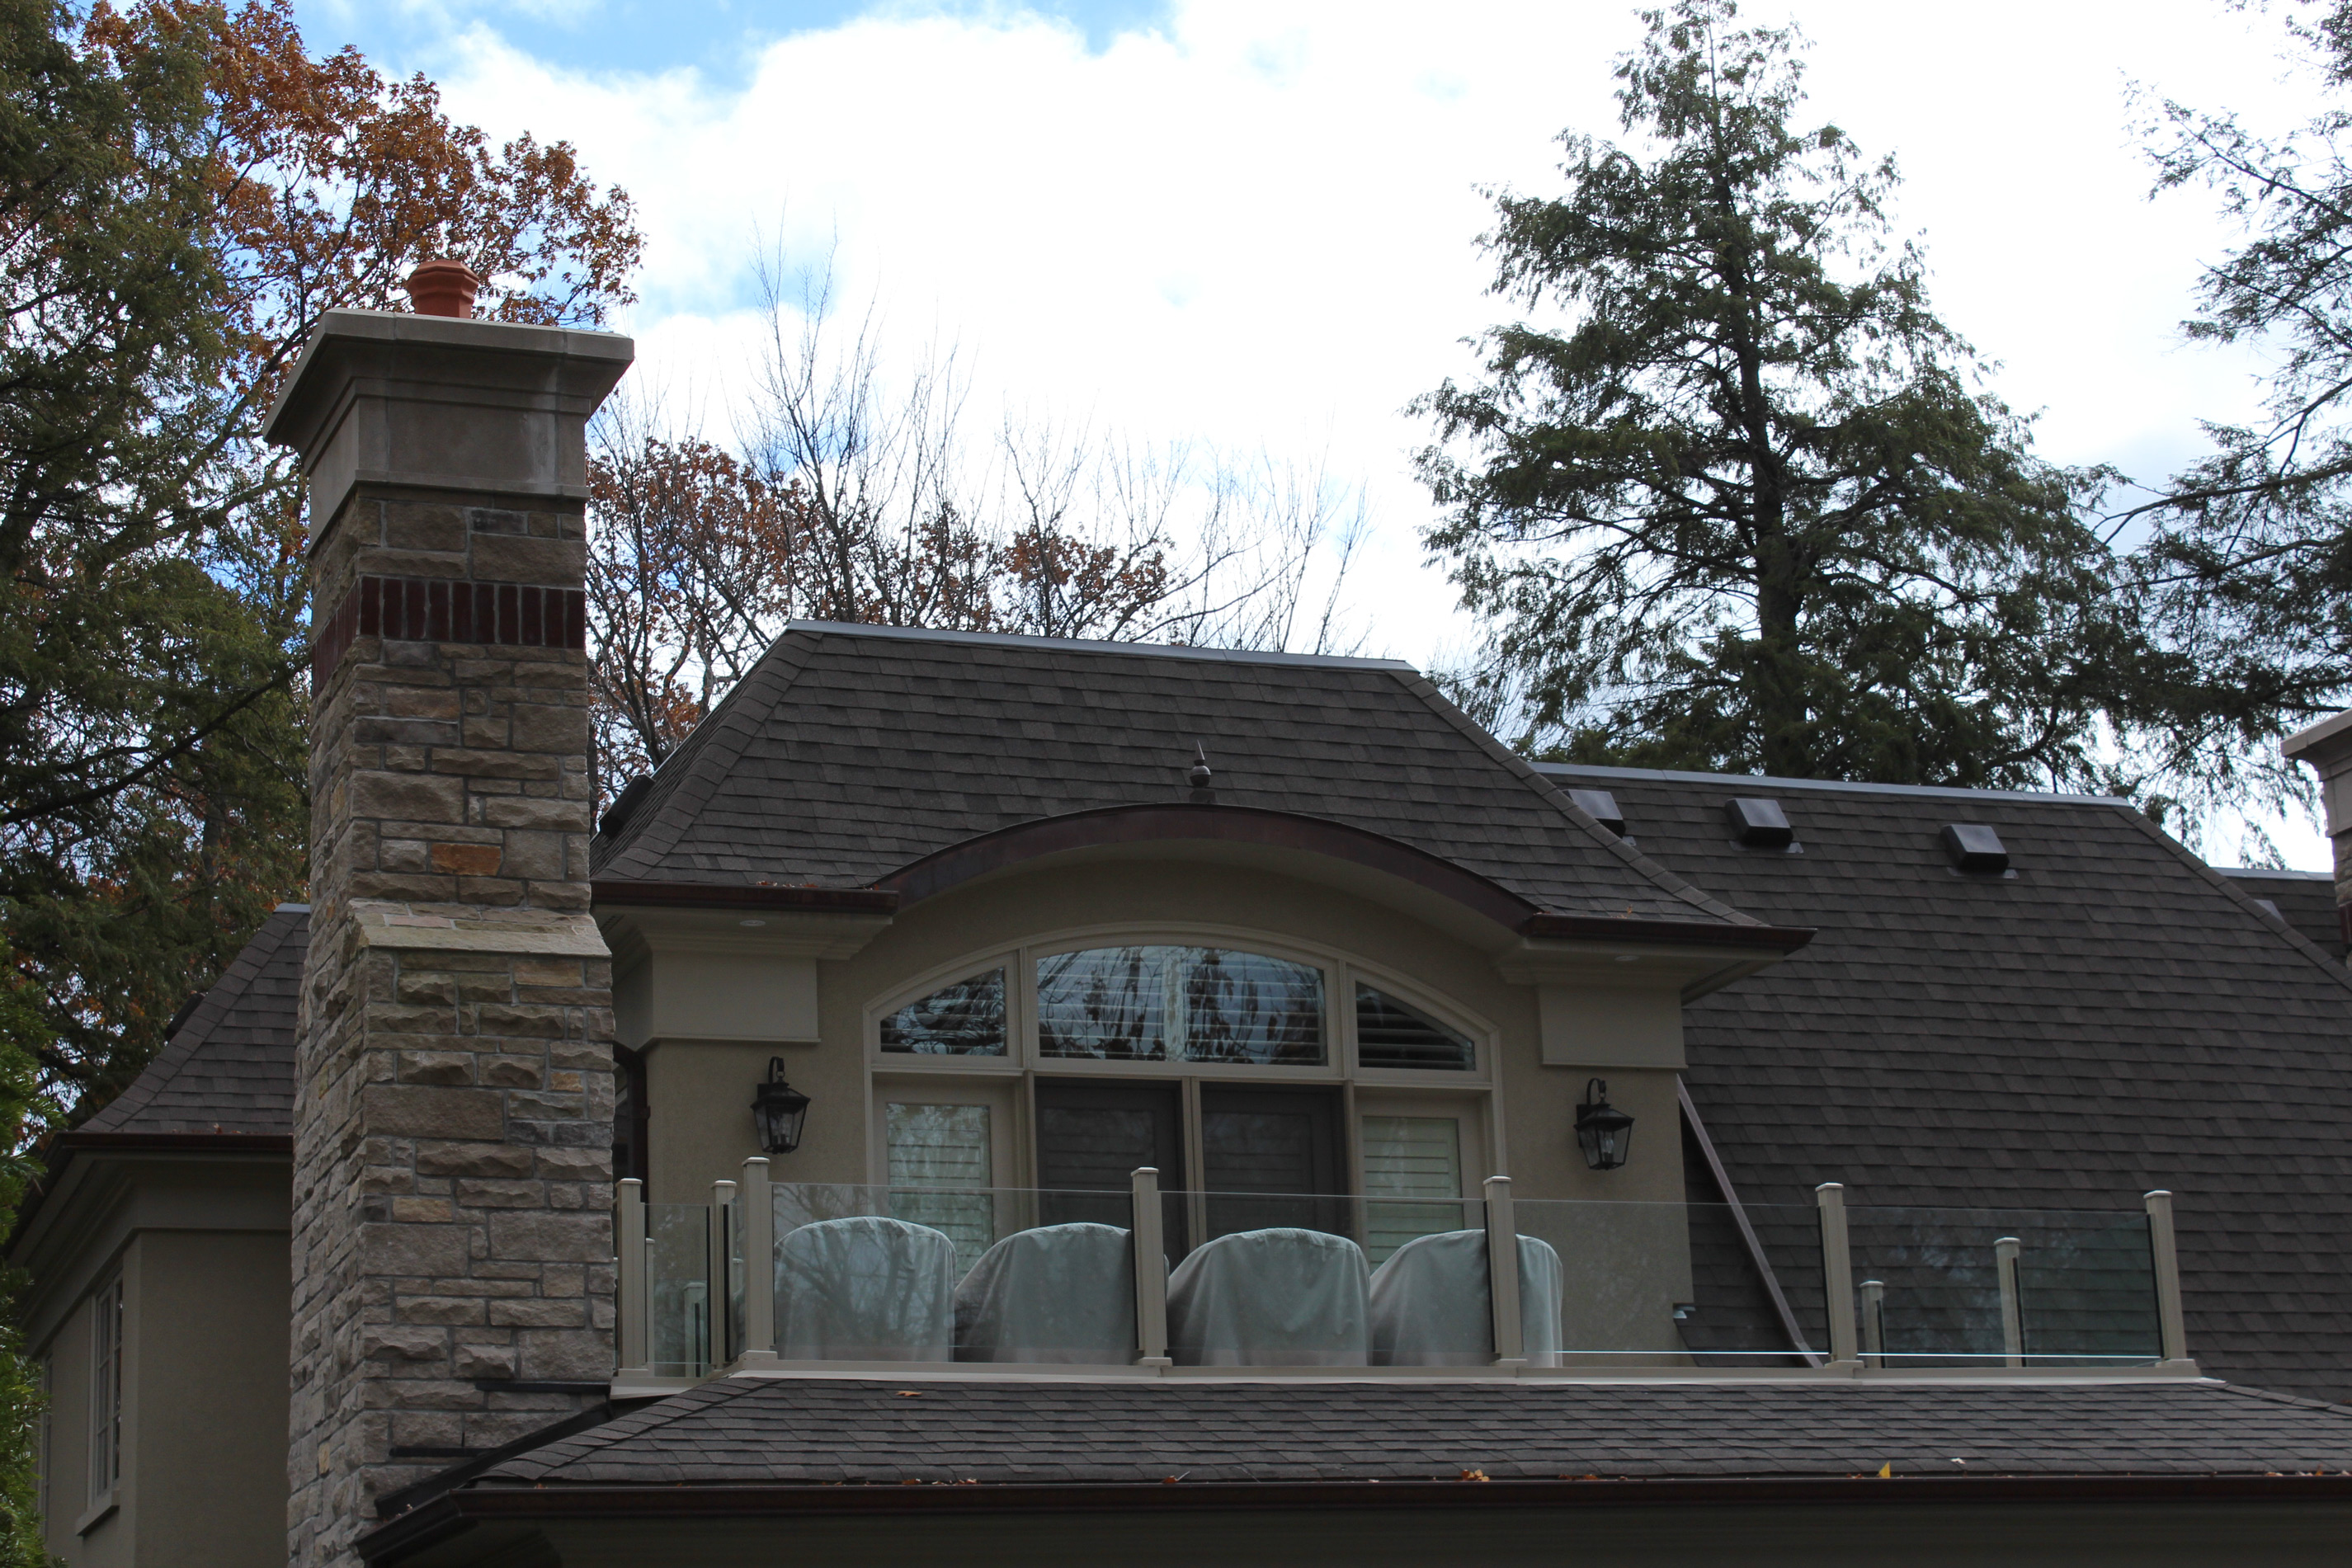 Outdoor Fireplace stone chimney - Stone colour is Eramosa Saw Cut